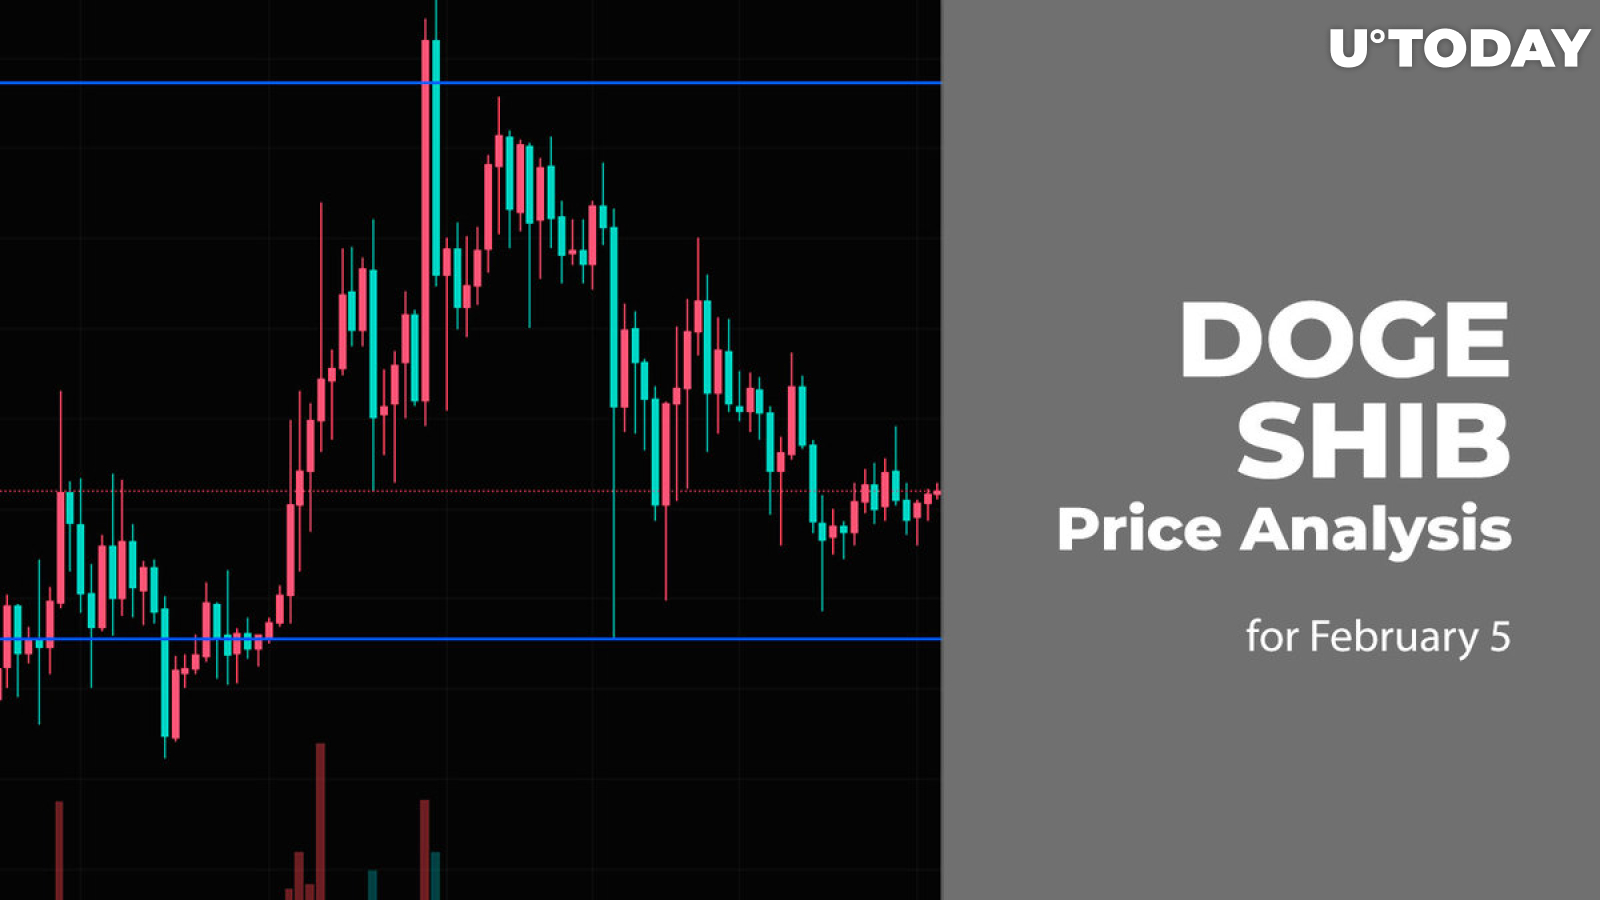 DOGE and SHIB Price Analysis for February 5